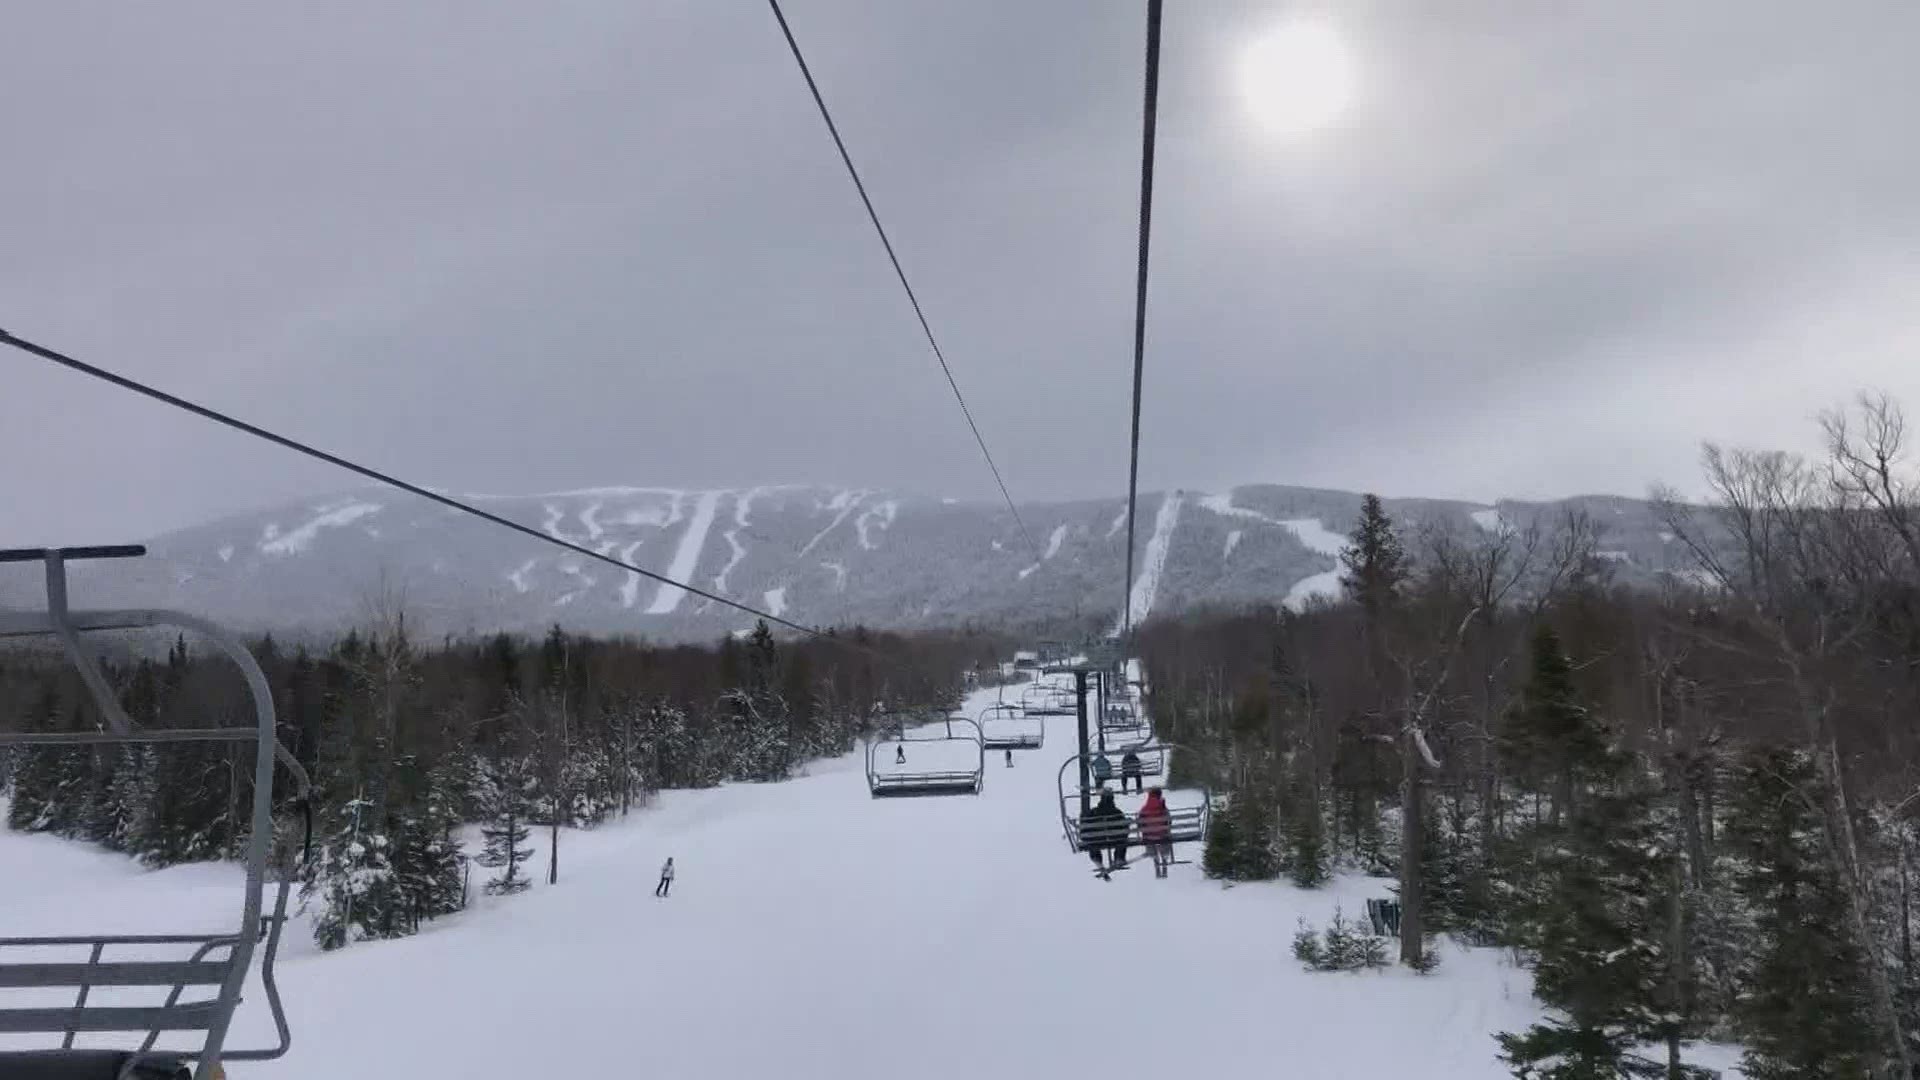 This year, Jay Peak in Vermont and Saddleback, here in Maine, decided to team up to offer special passes to those who wanted to add some travel to their ski season.